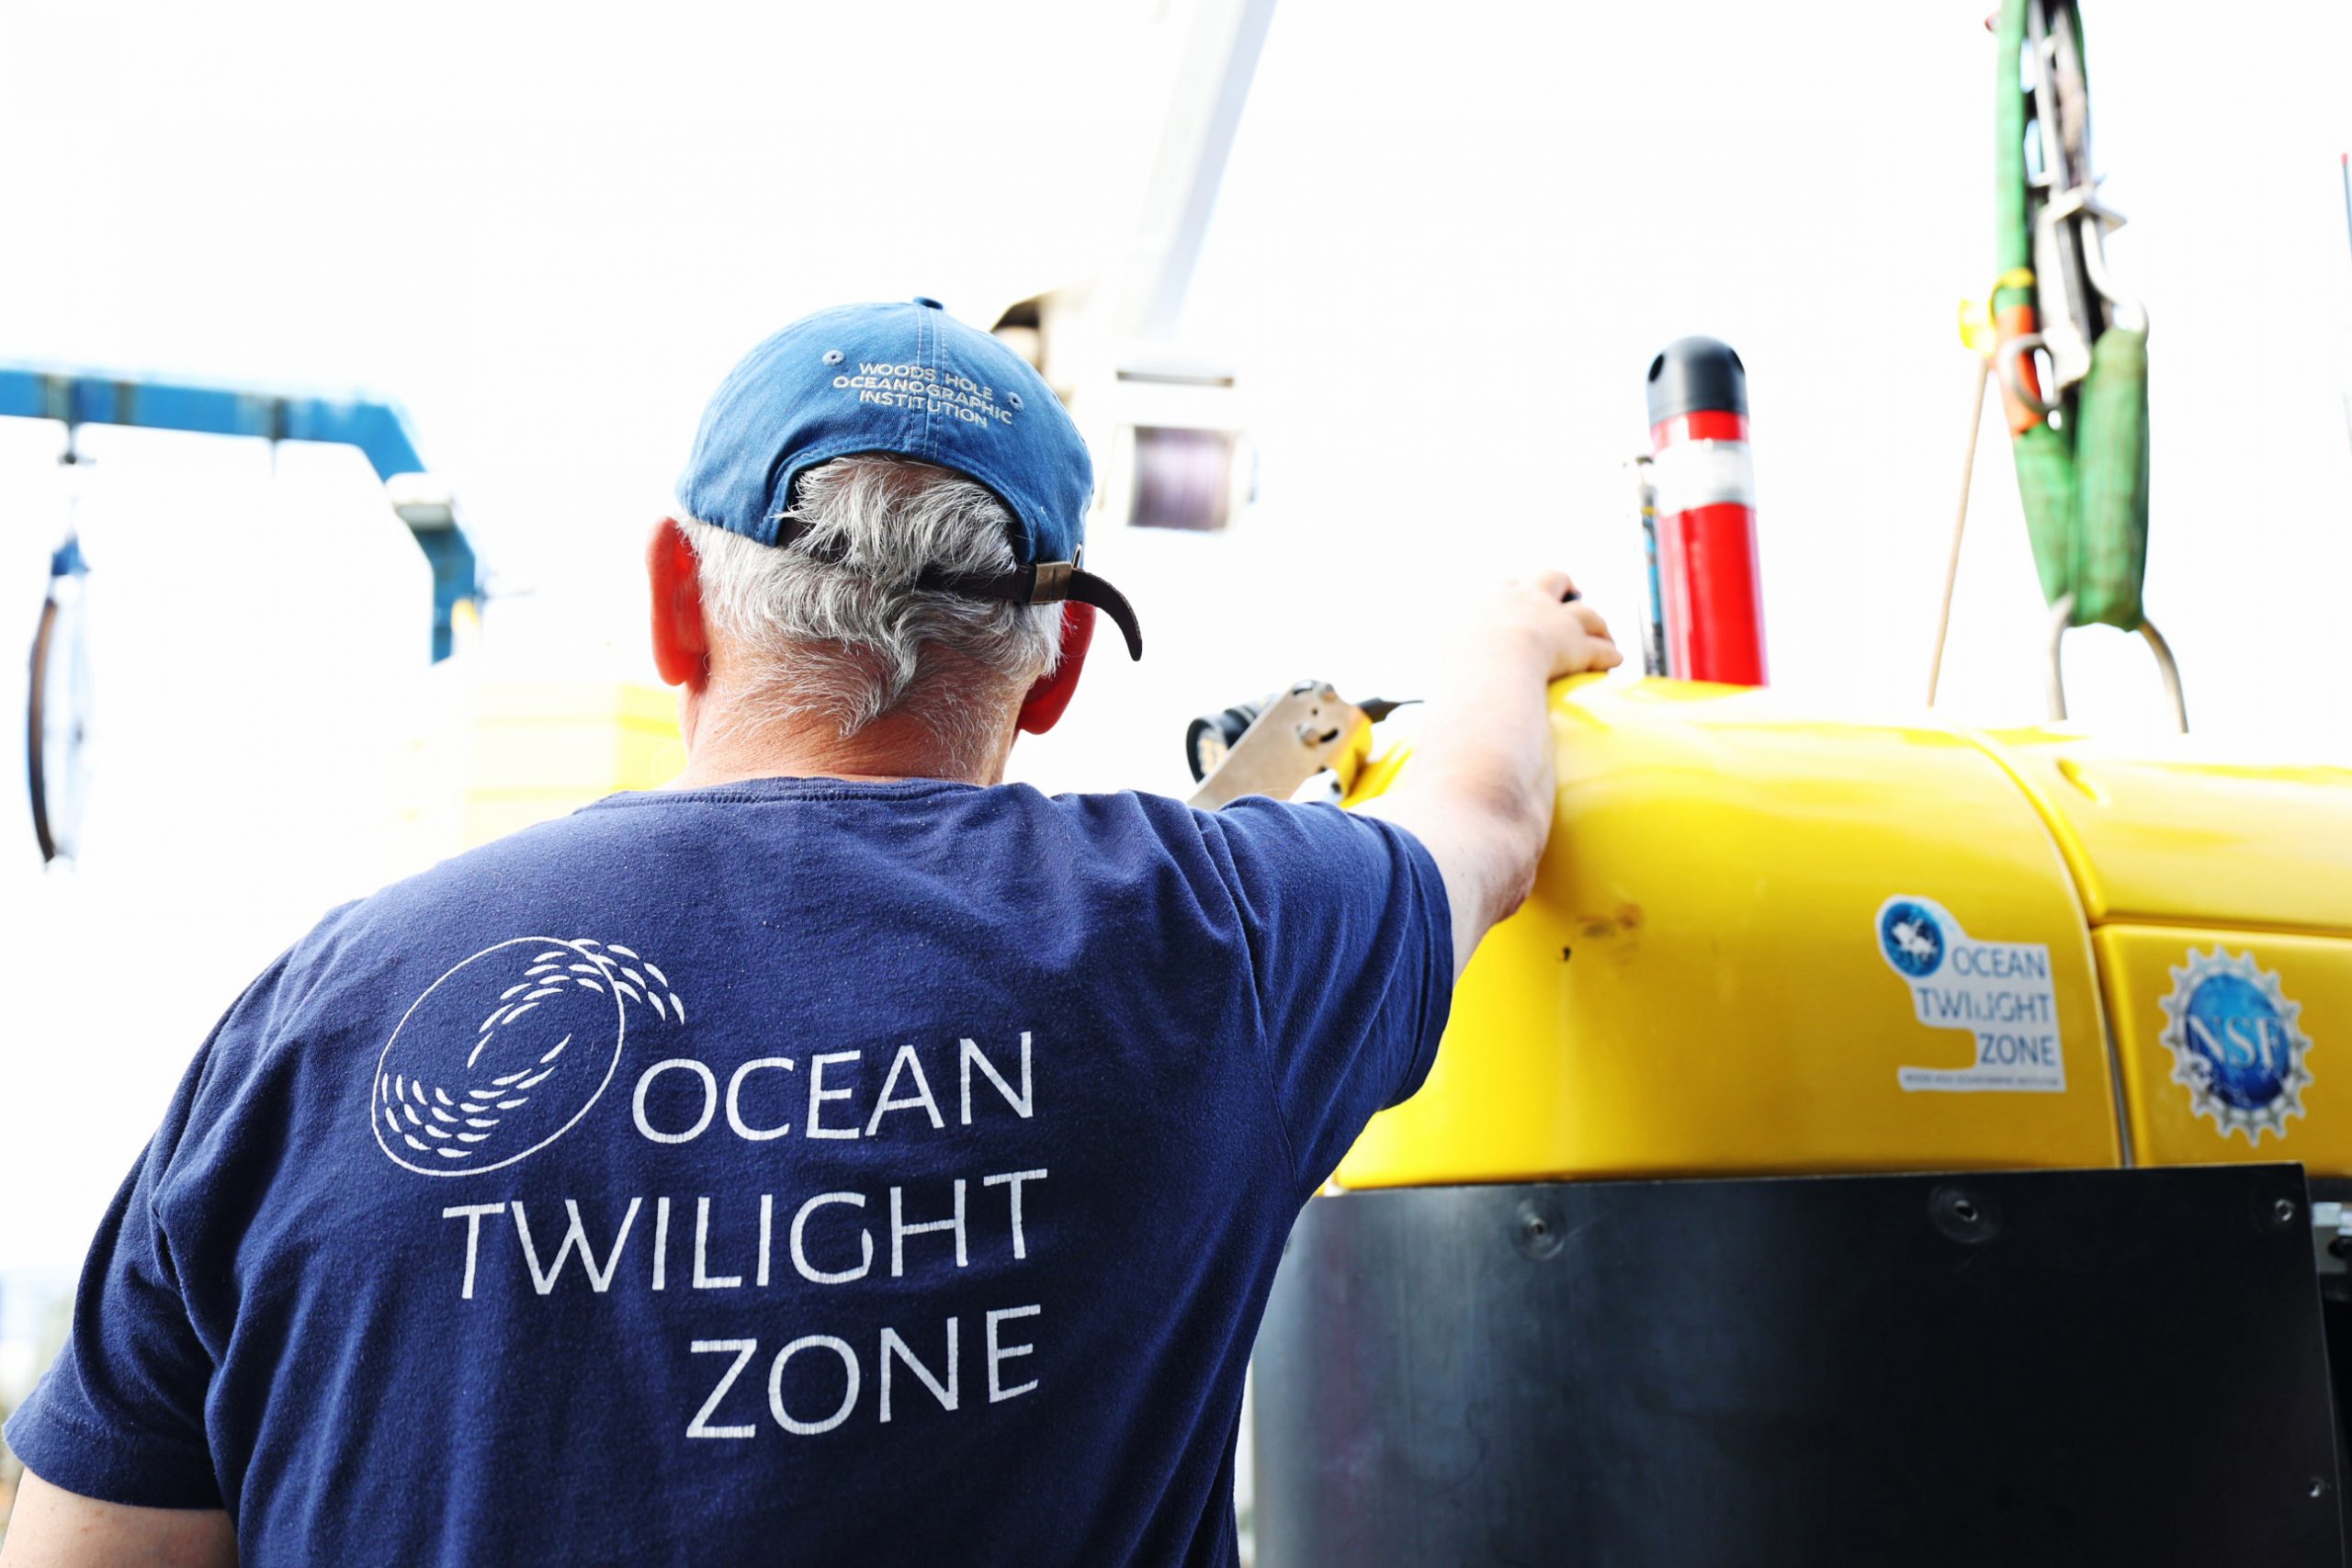 Dr. Dana Yoerger, Senior Scientist at the Woods Hole Oceanographic Institution, leans against the side of <i>Mesobot</i>. Yoerger led the team that designed and built the robotic vehicle. 